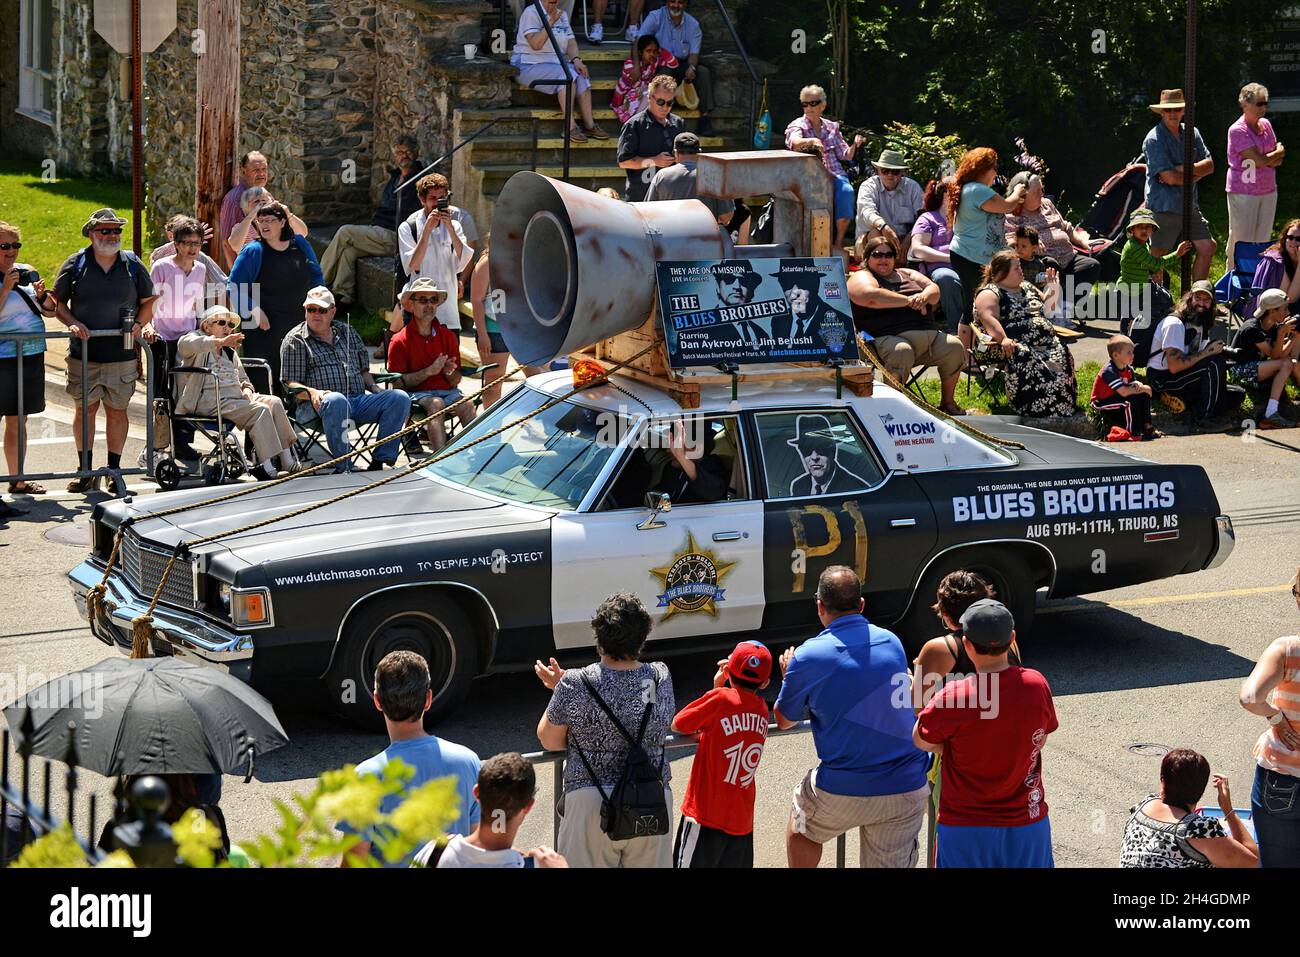 Dartmouth, Canada - June 30, 2005: The iconic Blues Brothers car is part of the annual Natal Day Parade in the Halifax Regional Municipality. They are Stock Photo